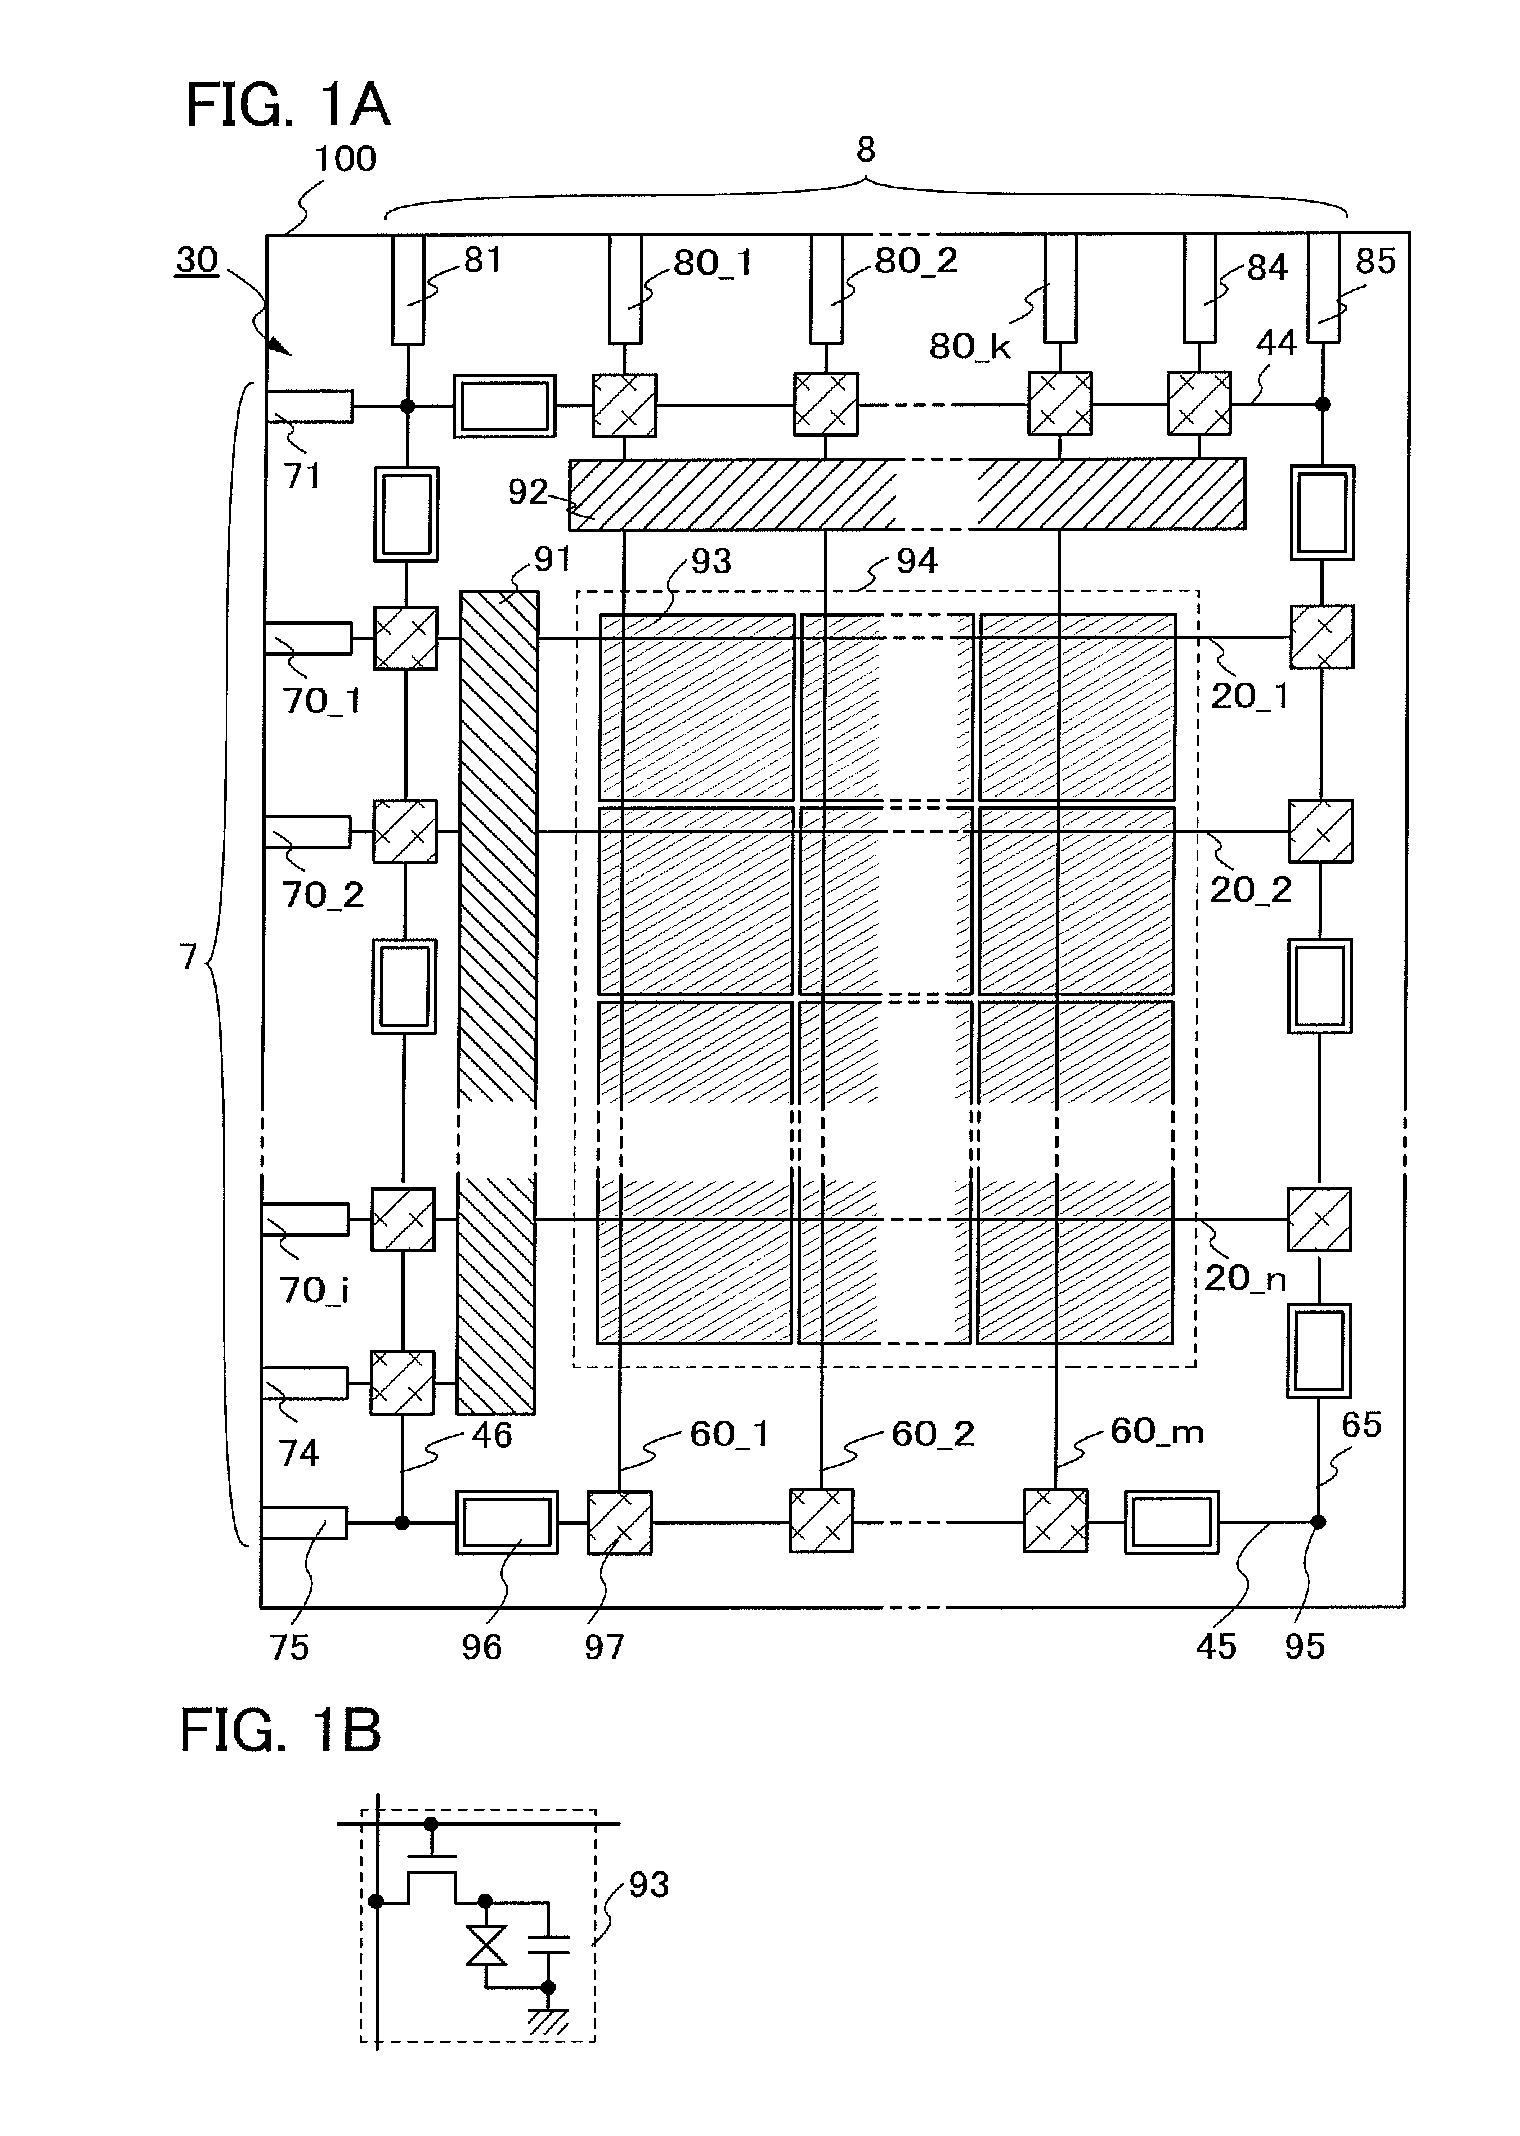 Semiconductor device comprising oxide semiconductor layer